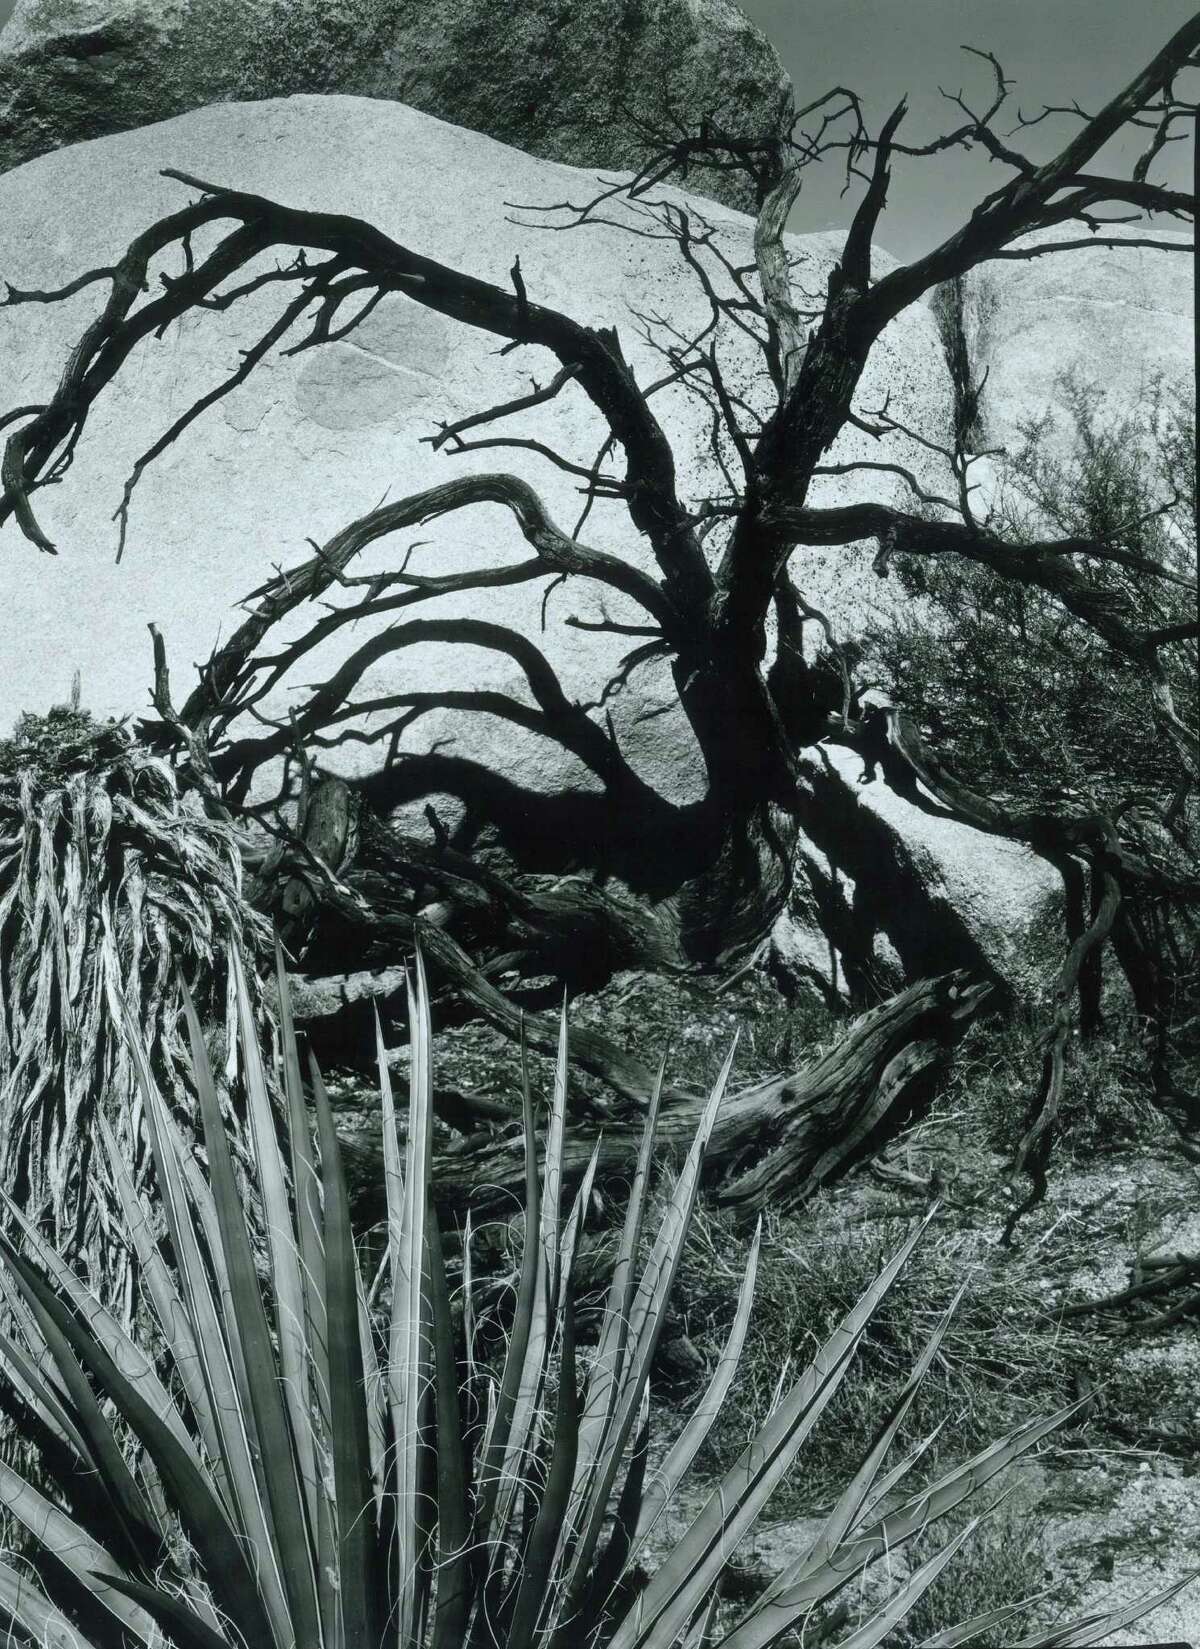 Brett Weston’s gelatin silver print, “Untitled” (known as Tree, Rock, Plant, Death Valley), is from 1965. It will be on view at the Bruce Museum in Greenwich through Feb. 12.